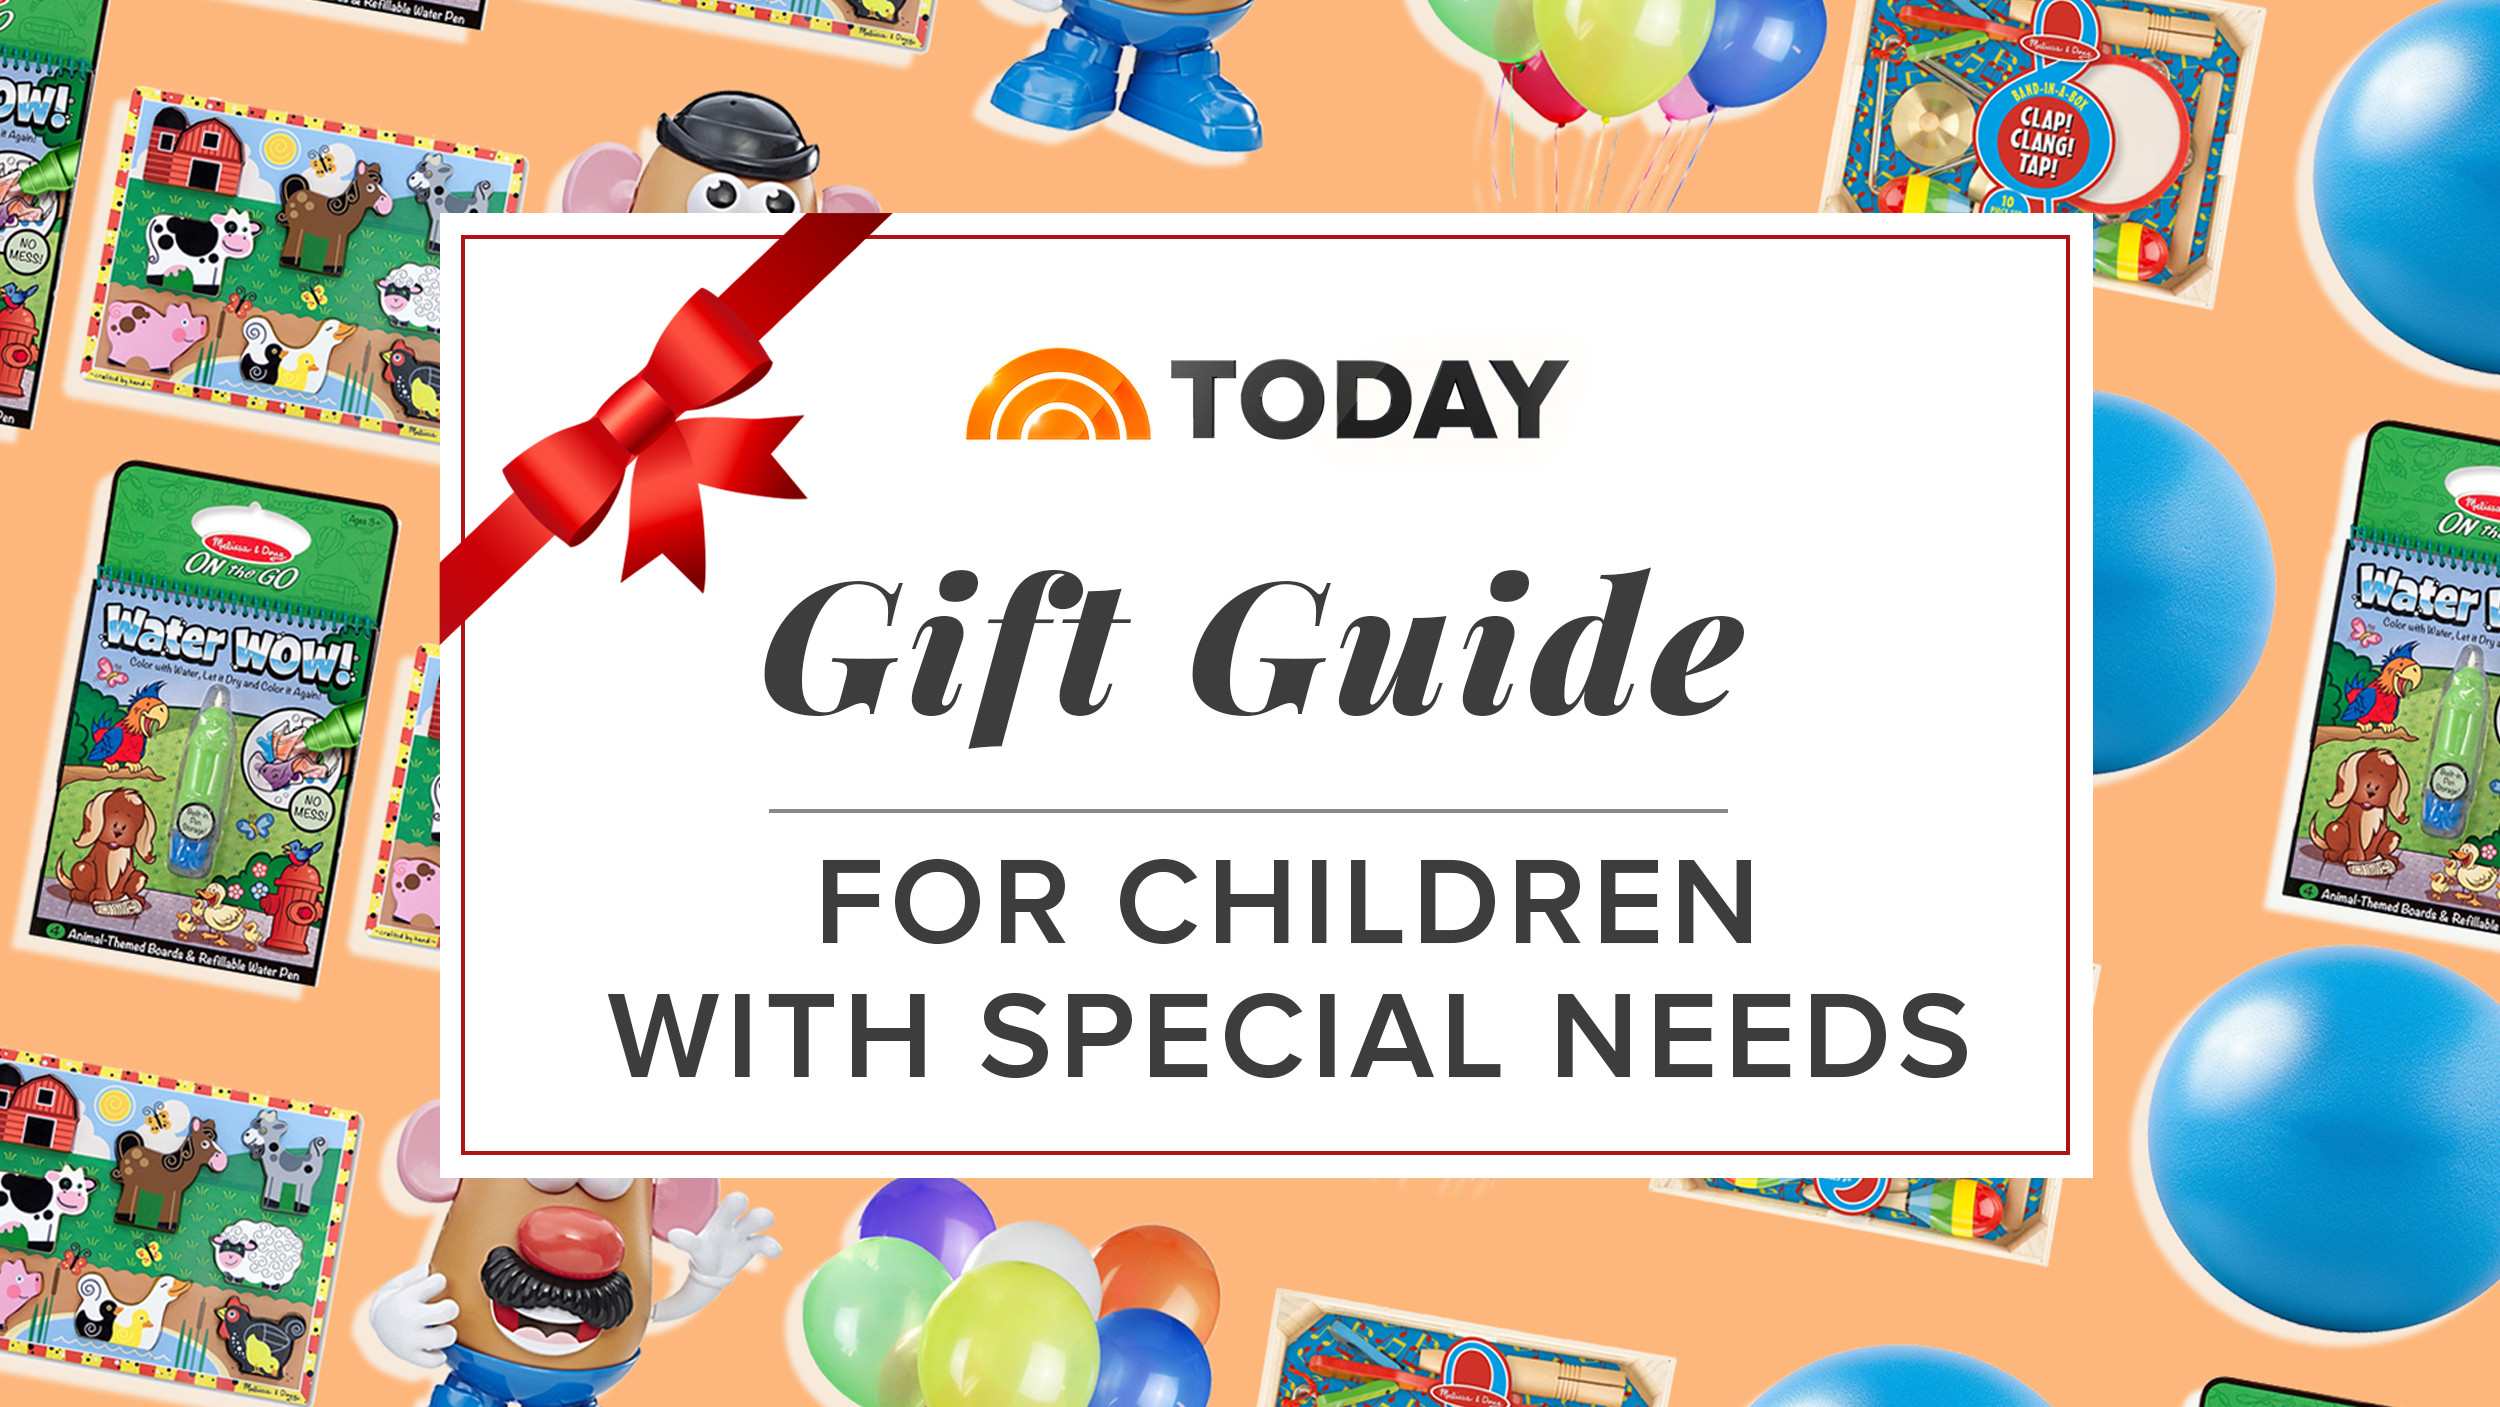 Gifts For Special Needs Children
 The best ts for children with special needs TODAY